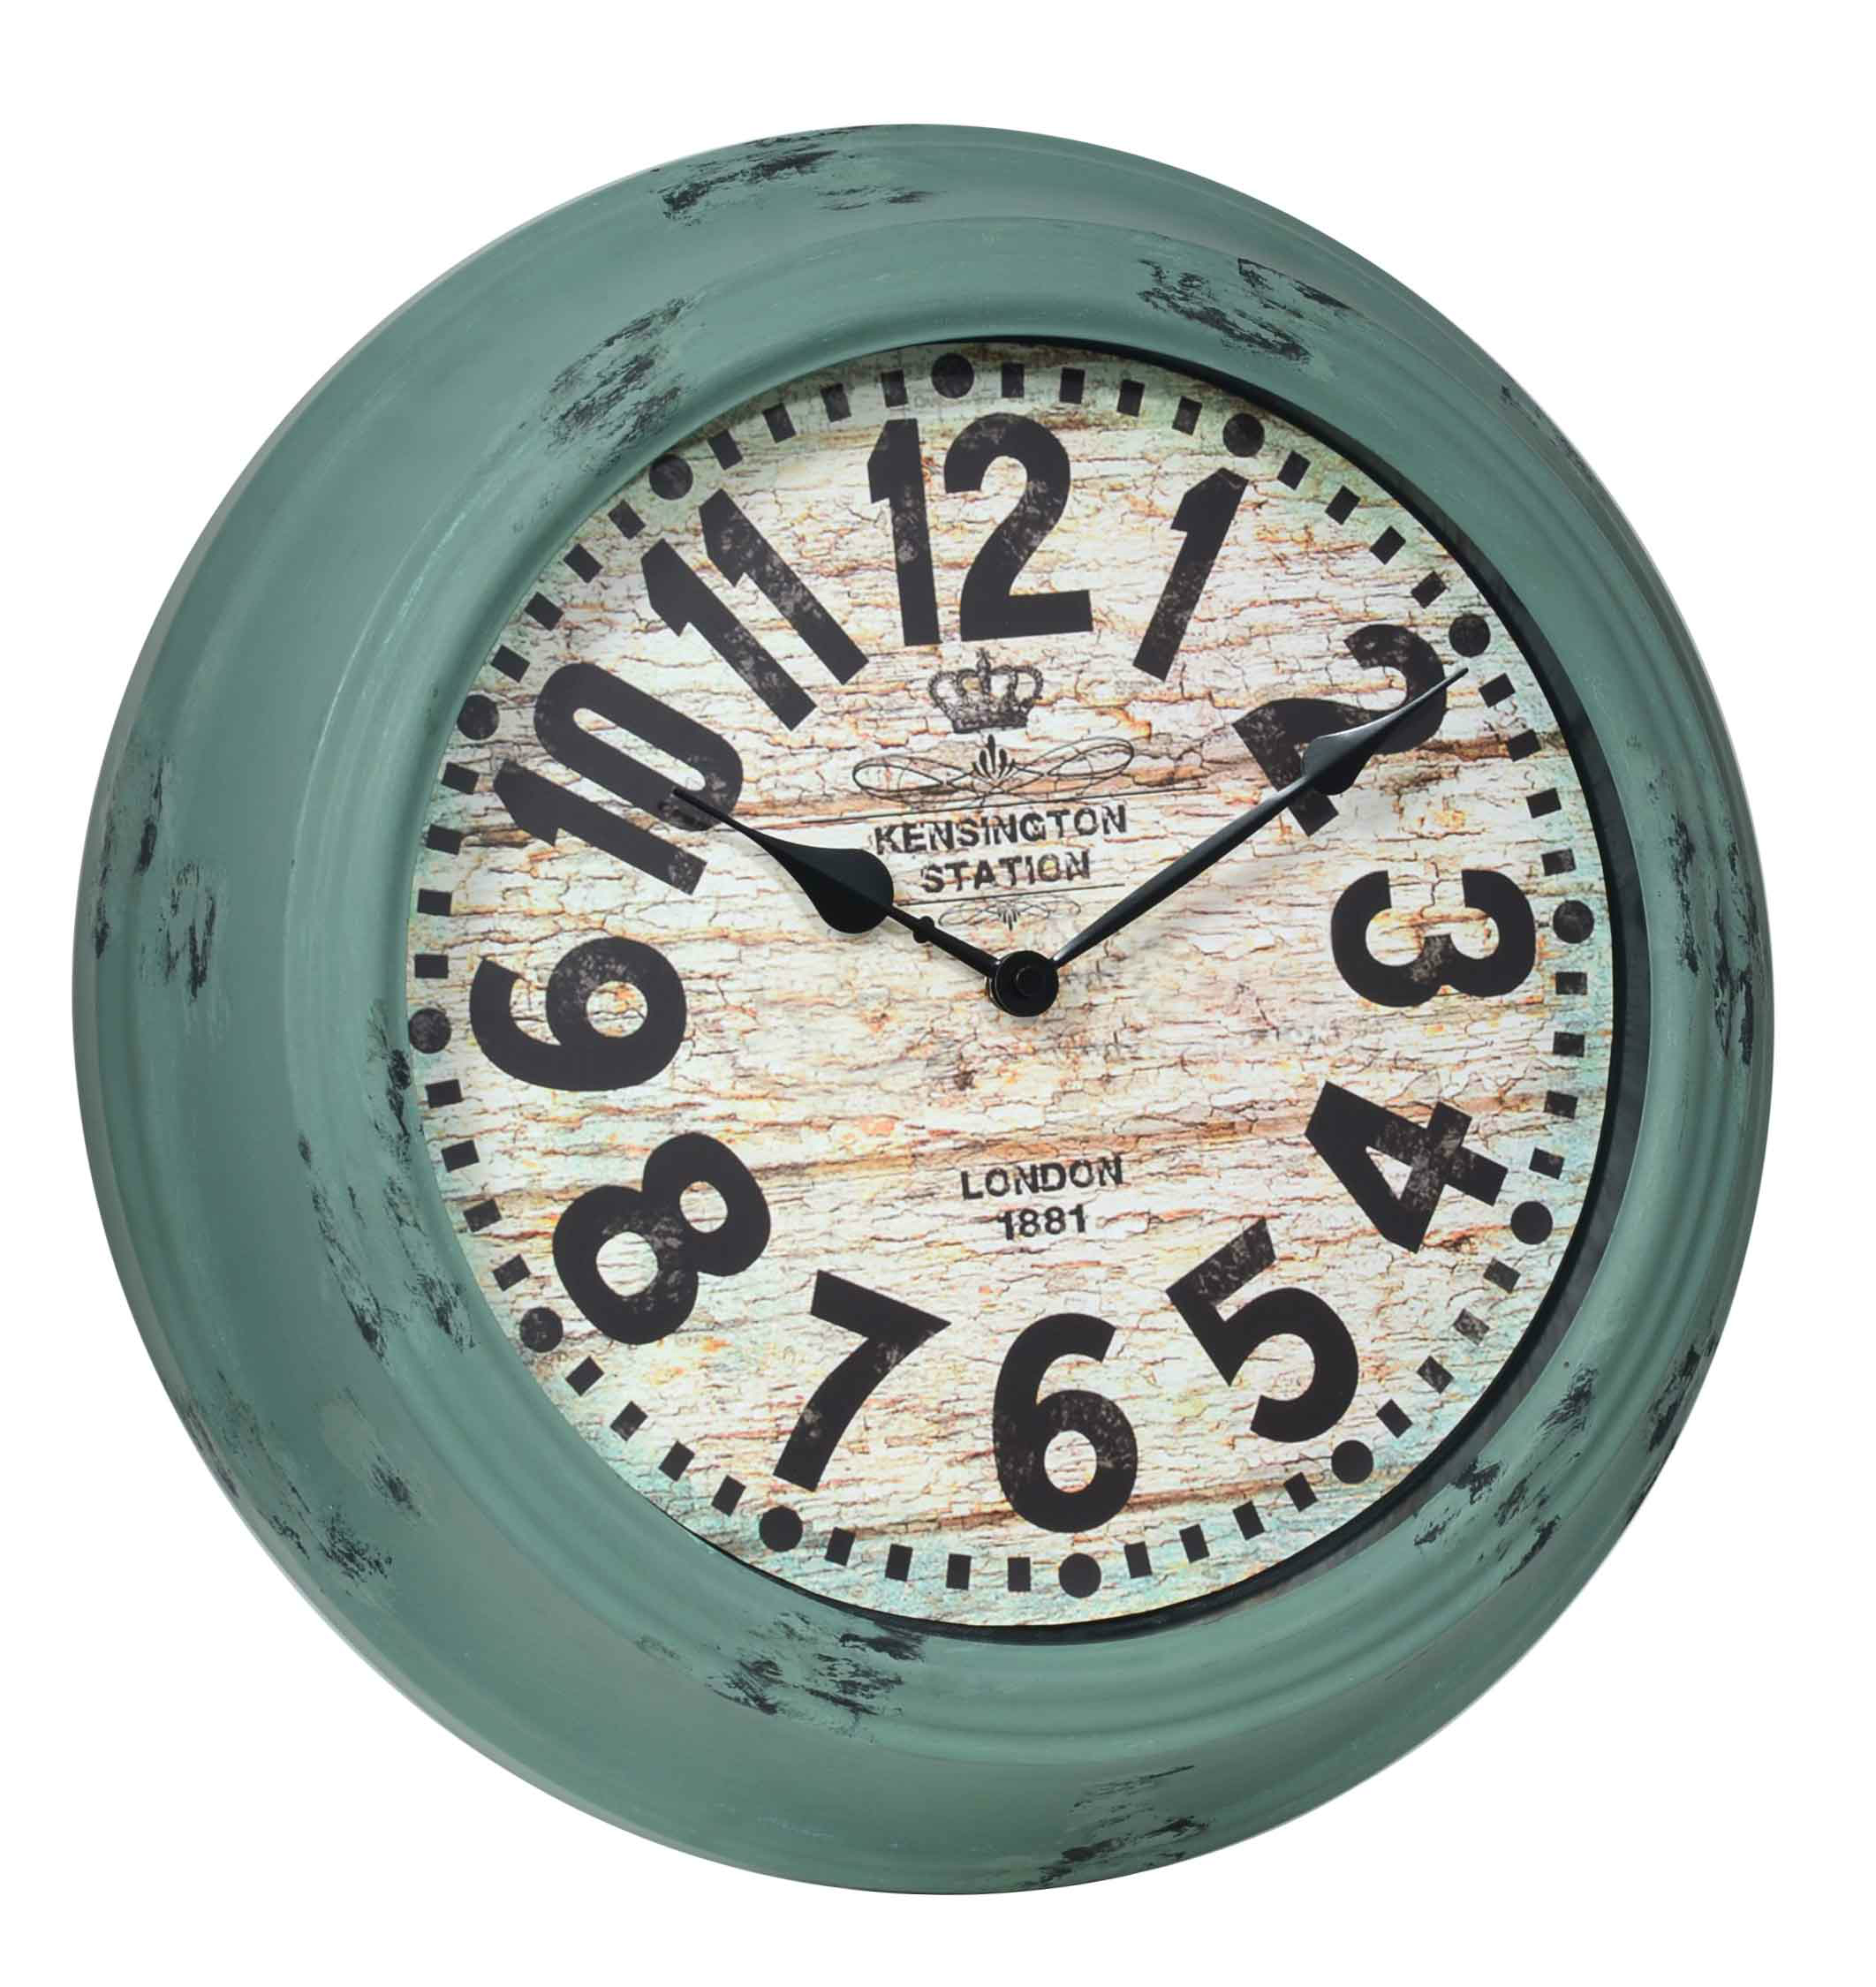 DEHENG 16 inch large number outdoor antique wall clock